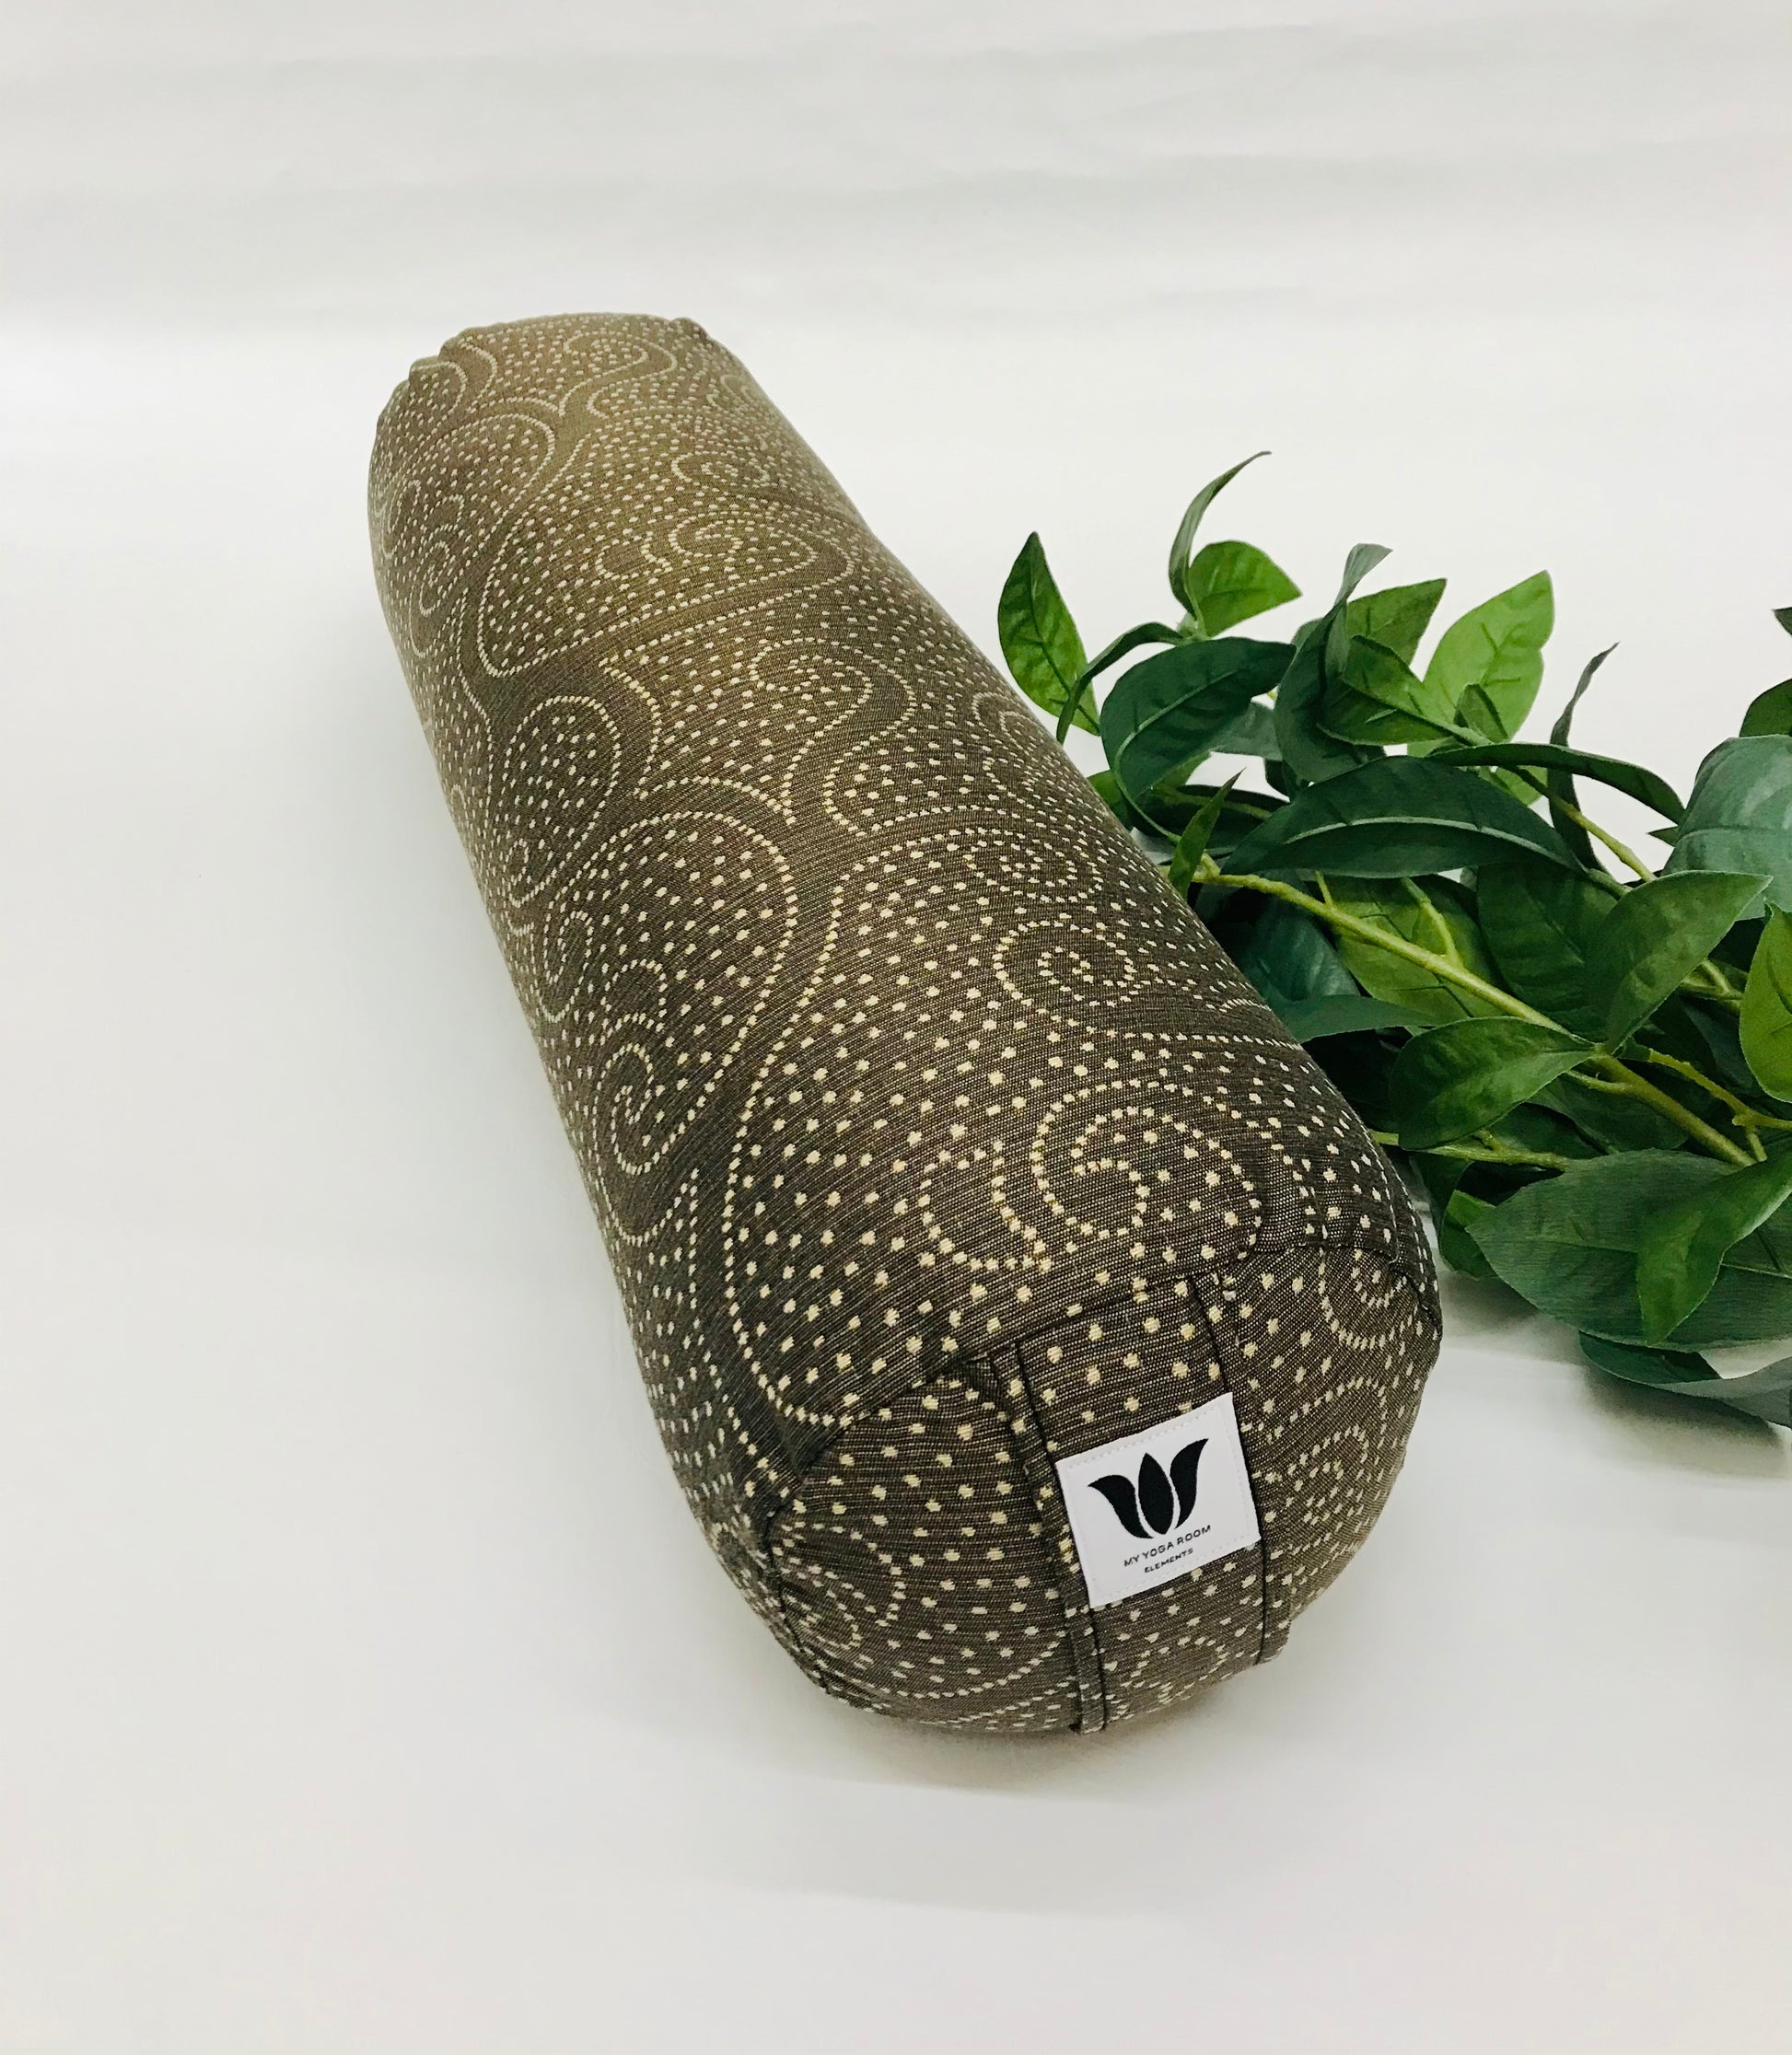 Round yoga bolster in brown durable swirl print fabric . Allergy conscious fill with removeable cover. Made in Canada by My Yoga Room Elements